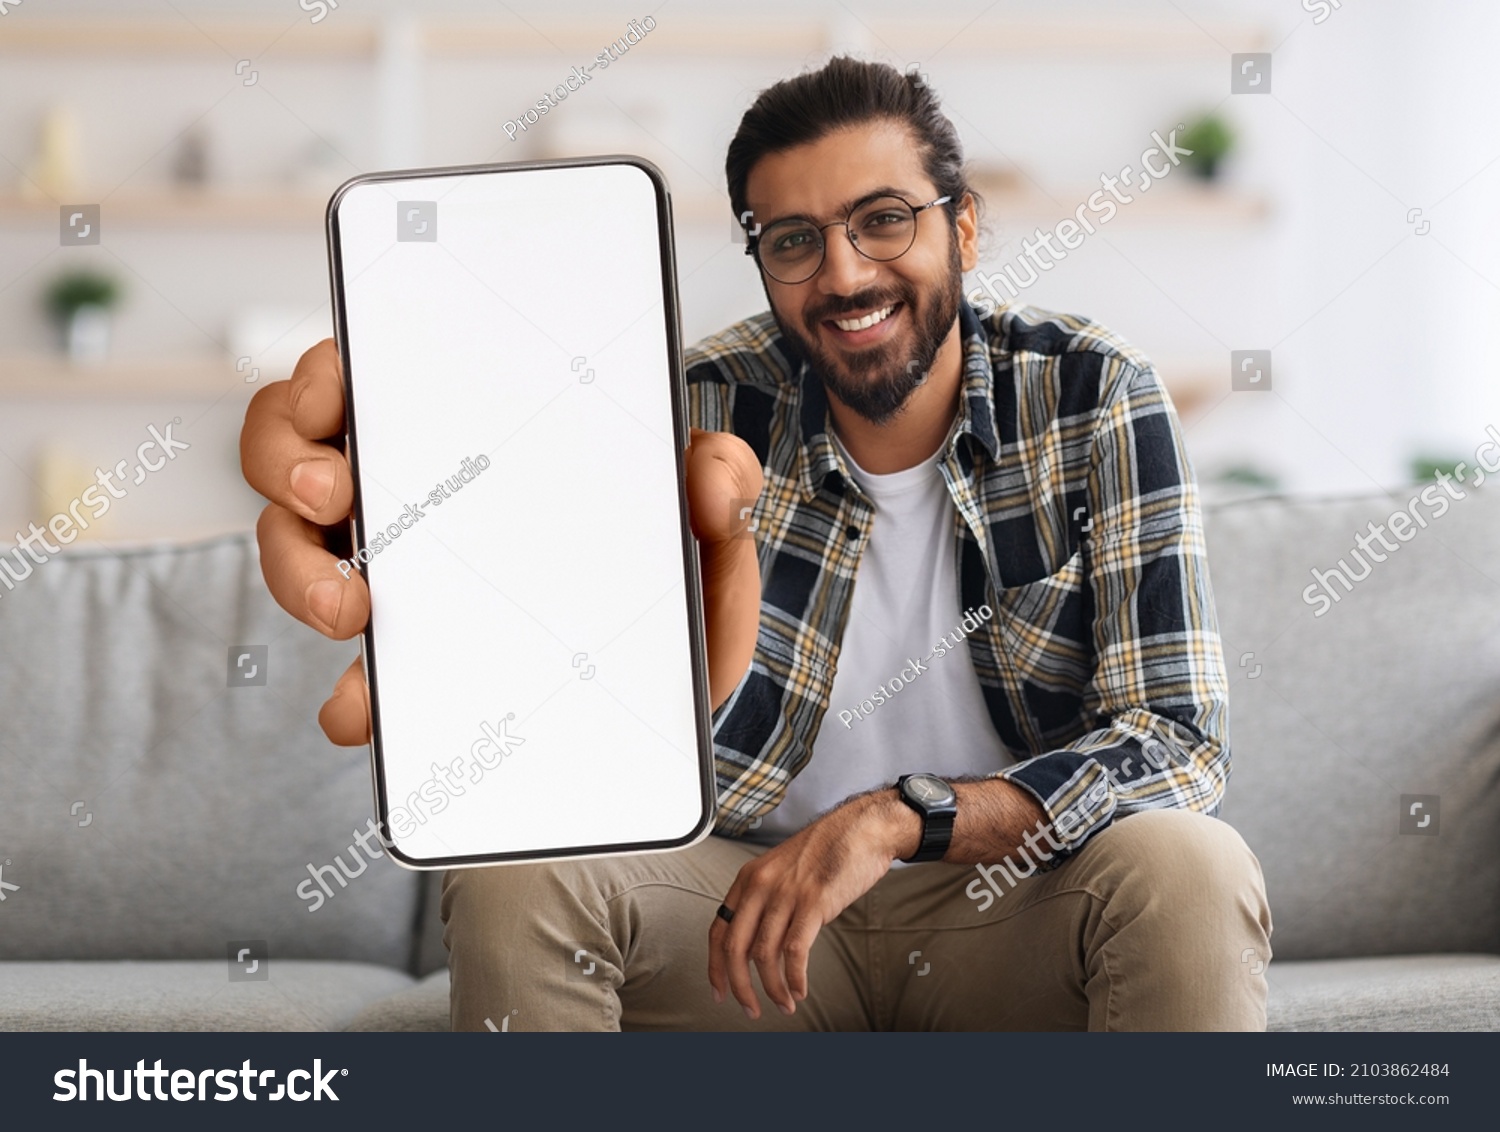 Cheerful Indian Guy Showing Smartphone With Big Blank White Screen At Camera, Happy Young Eastern Man Recommending New Mobile App Or Website While Sitting On Couch At Home, Creative Collage, Mockup #2103862484